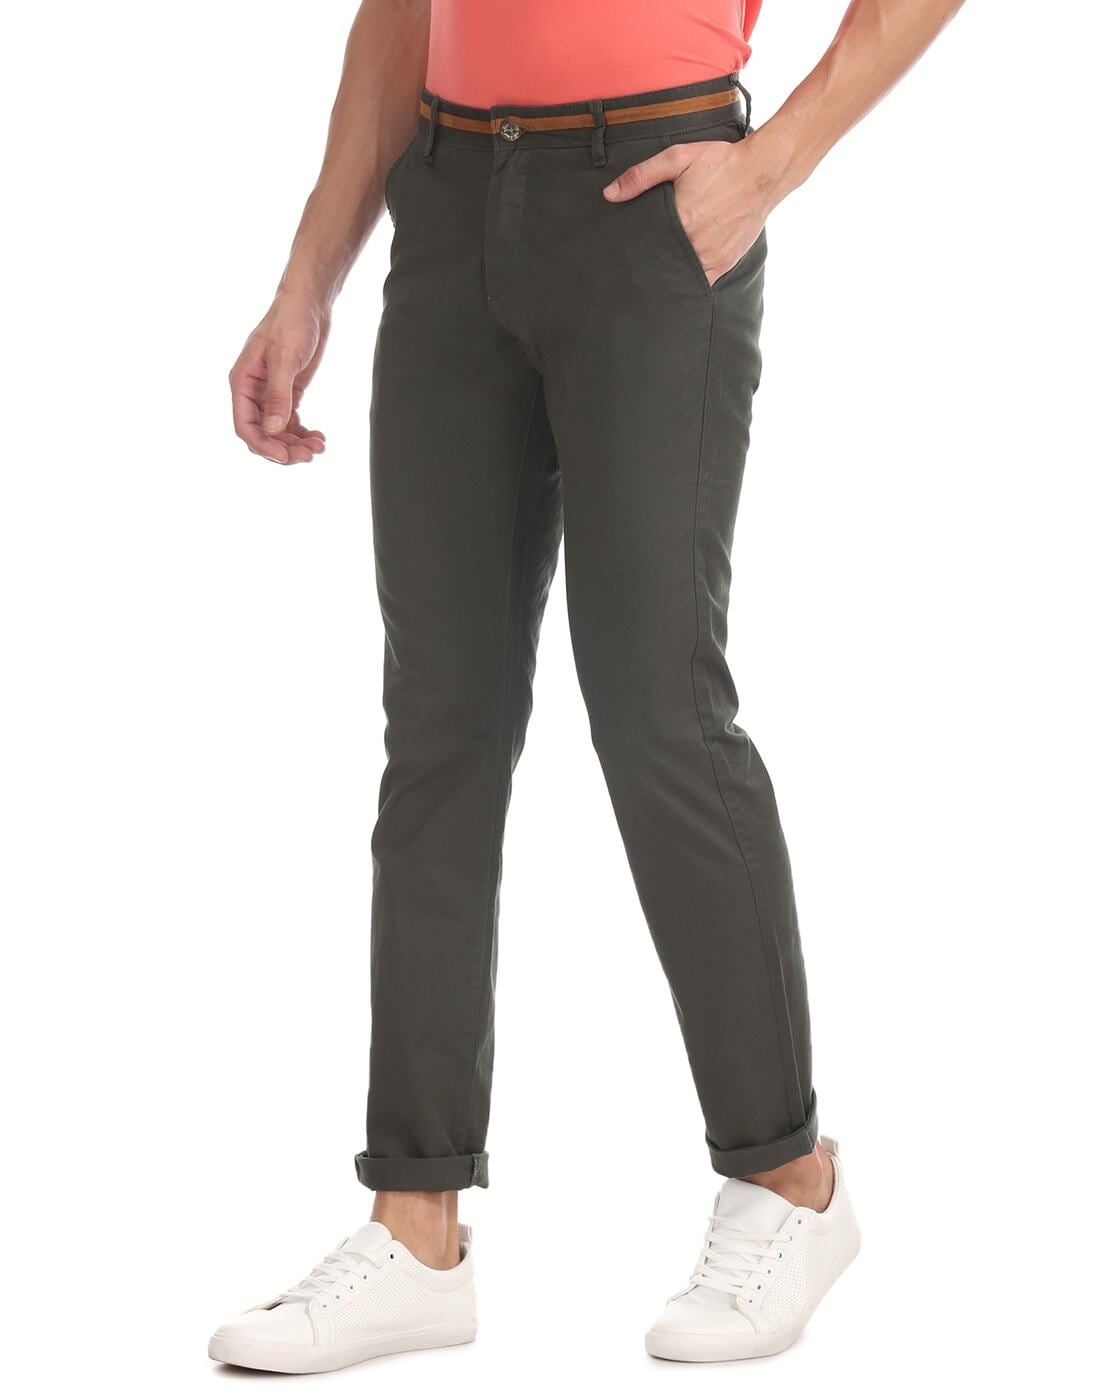 Buy Ruf & Tuf Grey Slim Fit Flat Front Casual Trousers online